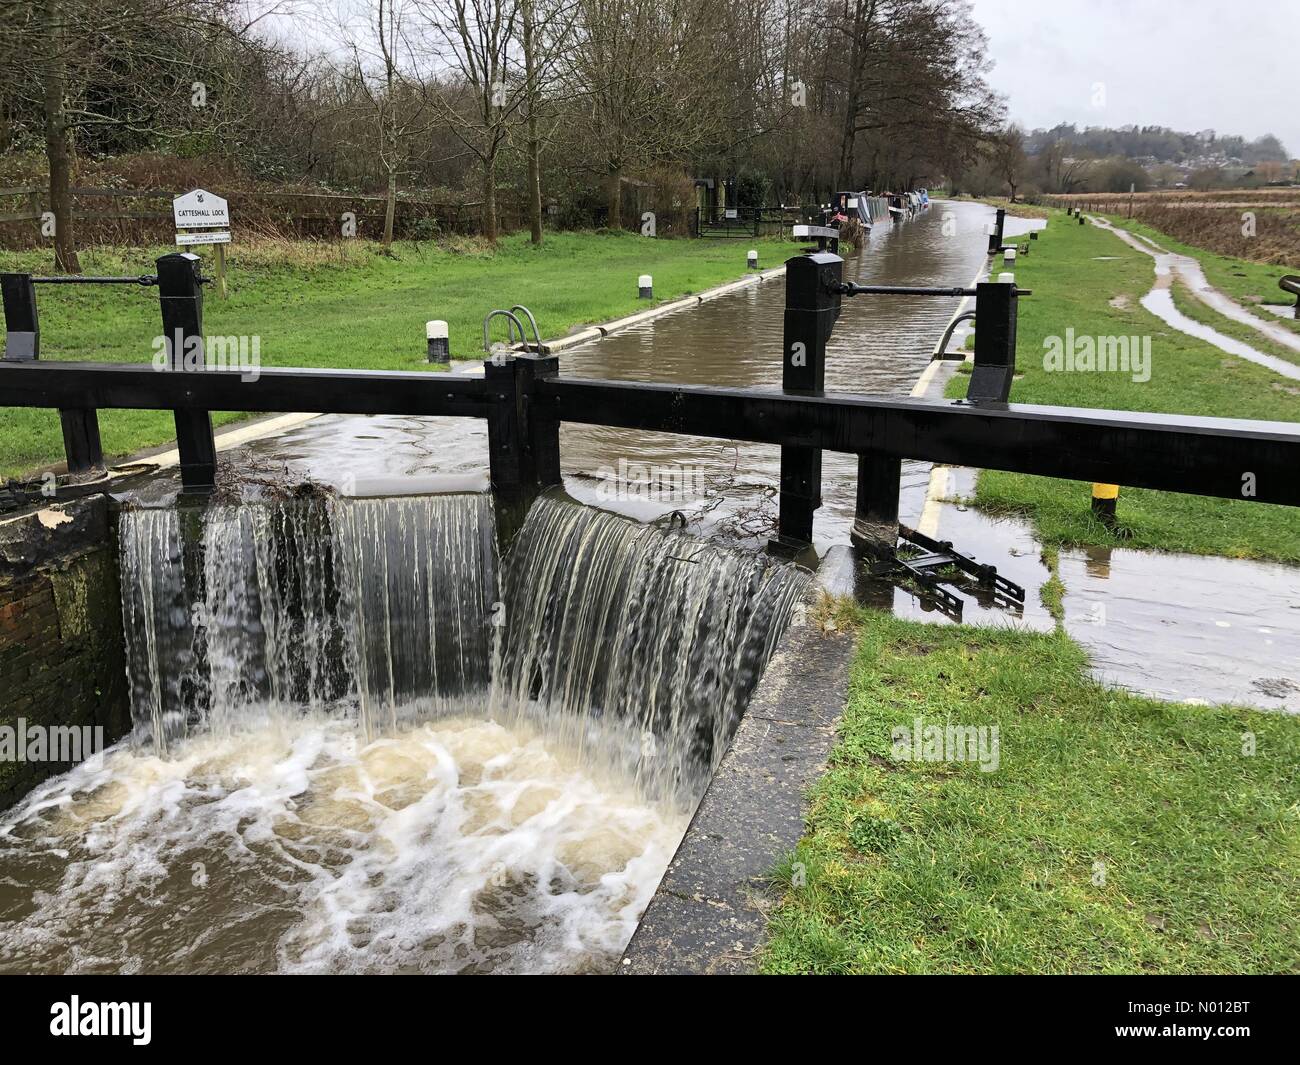 UK Weather: Flooding in Godalming. Catteshall Lane, Godalming. 16th February 2020. Heavy rainfall from Storm Dennis overnight. Catteshall Lock overtopping on the River Wey in Godalming in Surrey. Credit: jamesjagger/StockimoNews/Alamy Live News Stock Photo